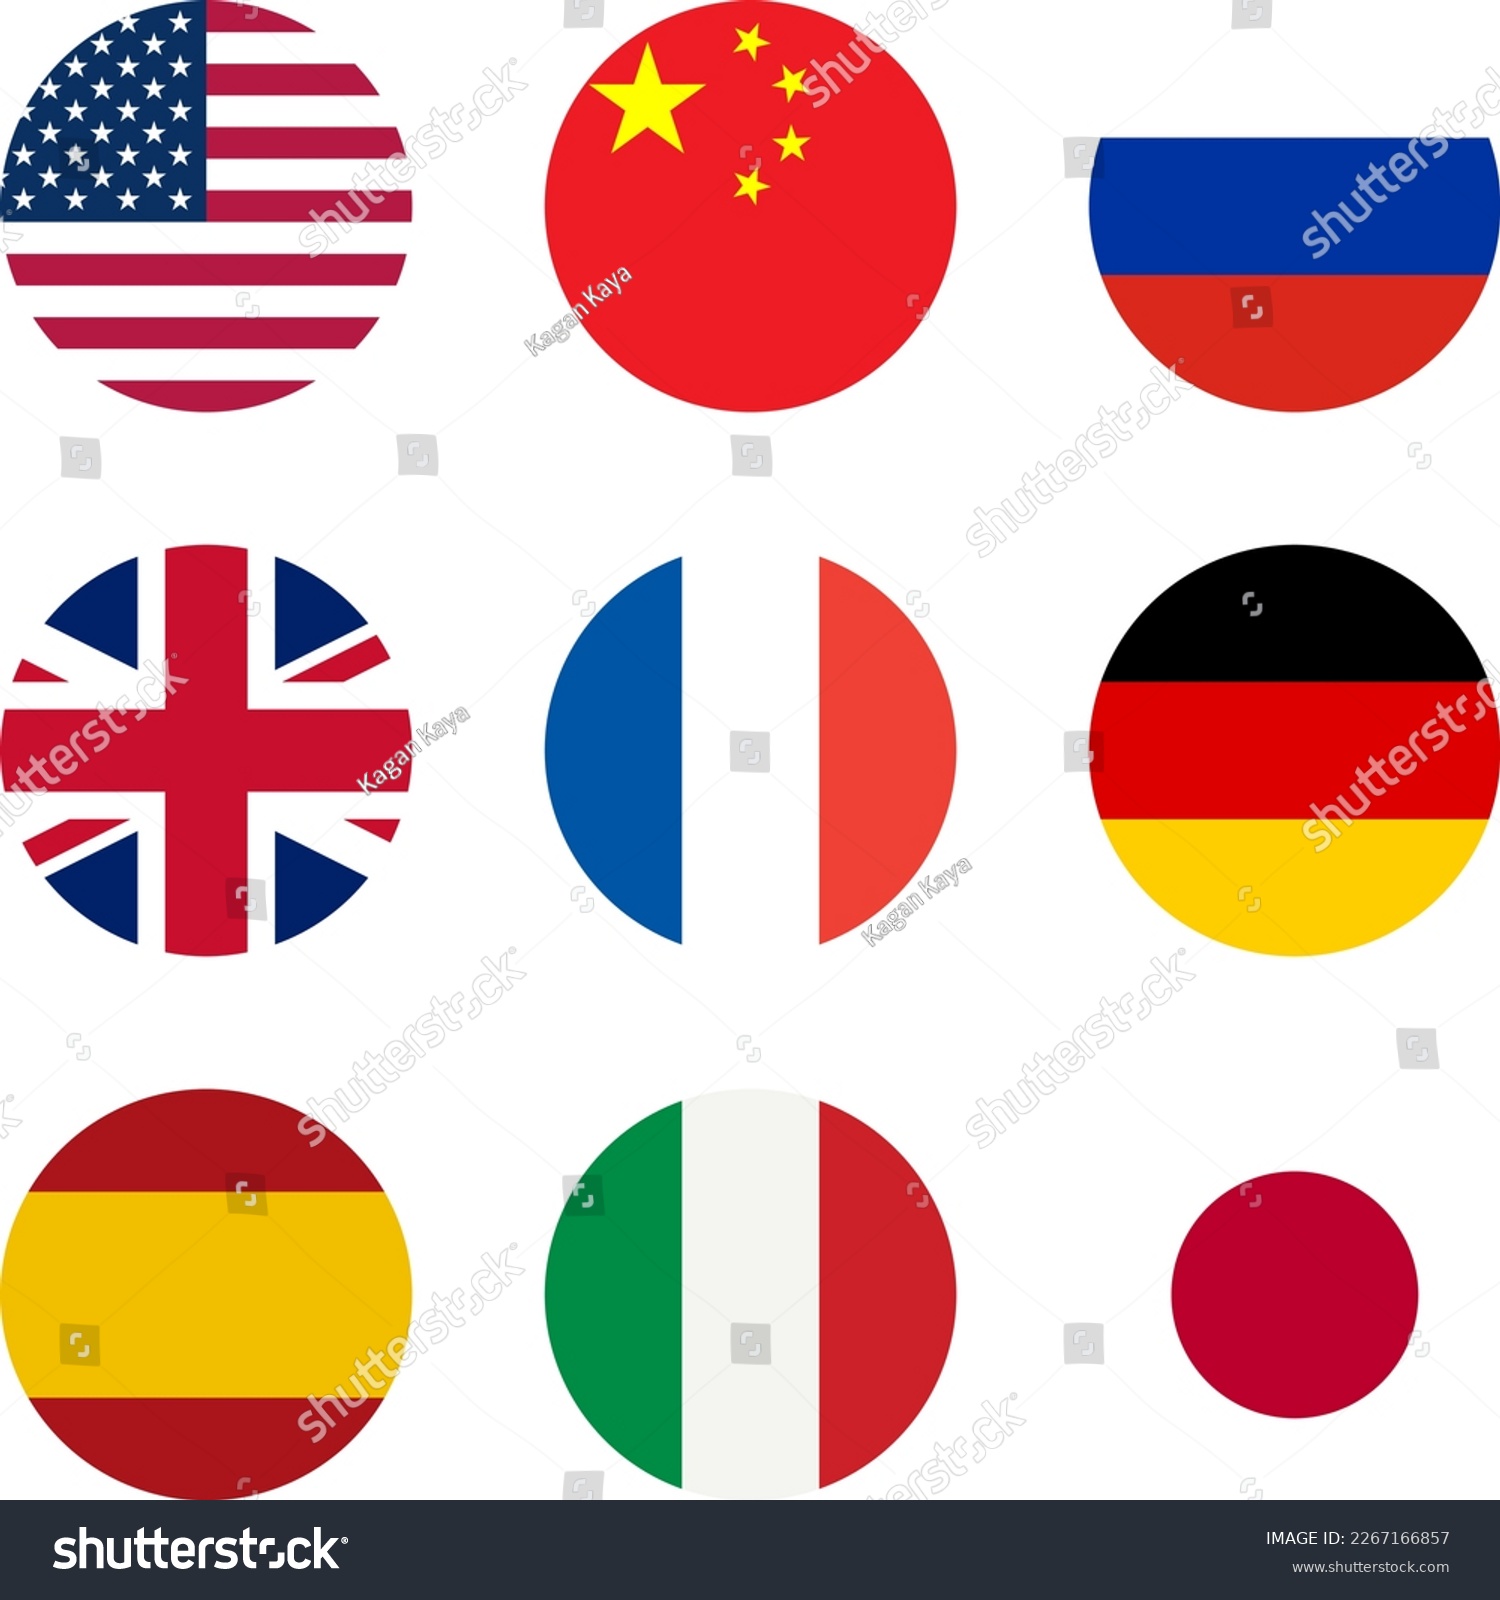 SVG of Set of Round Flag Icon Collection of USA United States of America, China, Russia, United Kingdom UK Great Britain, France, Germany, Spain, Italy and Japan. Vector Image. svg